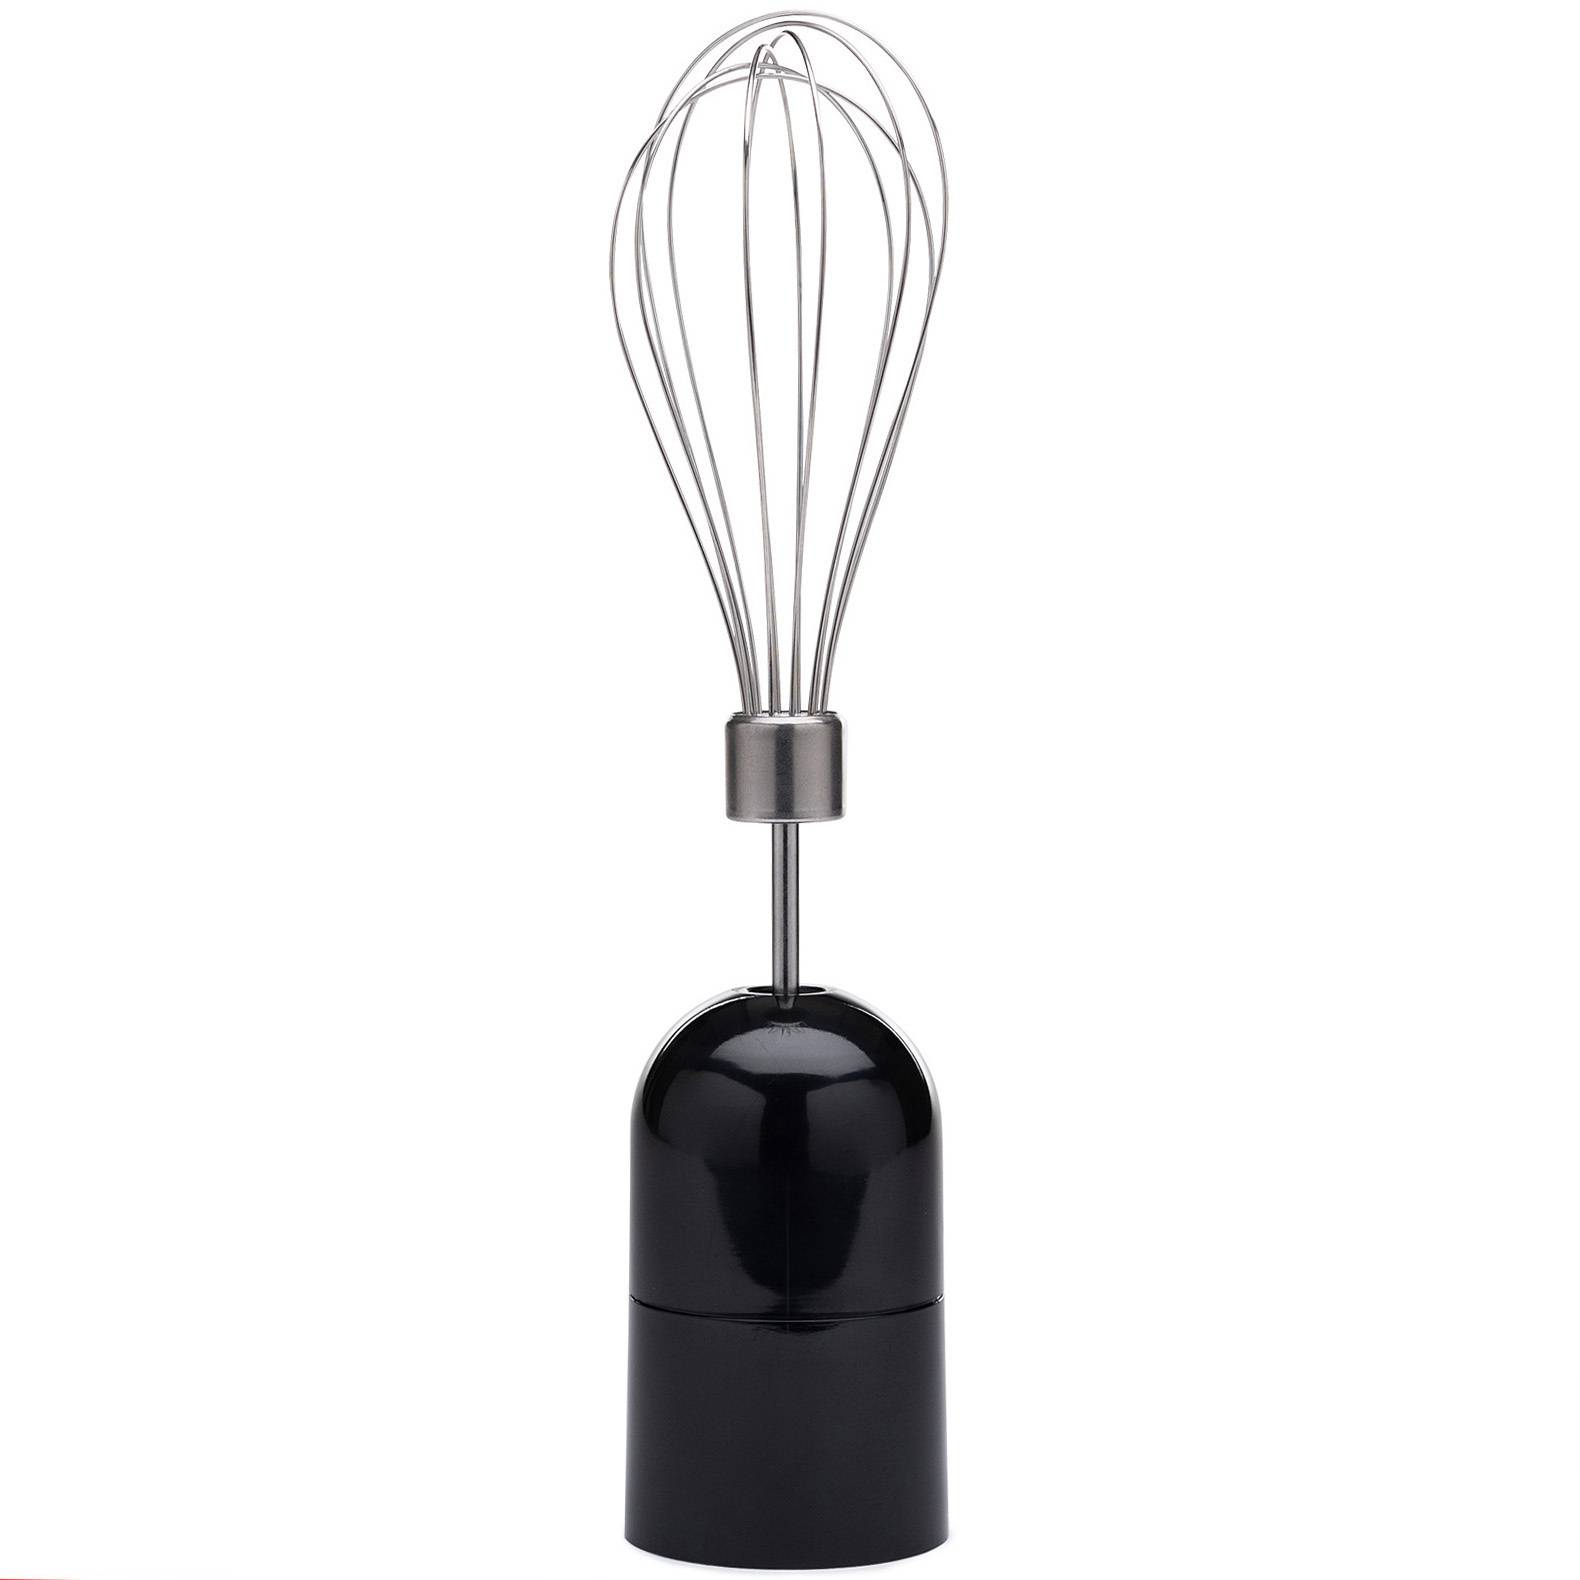 ChefWave Egg Whisk Attachment for the ChefWave InterMix Immersion Hand Blender